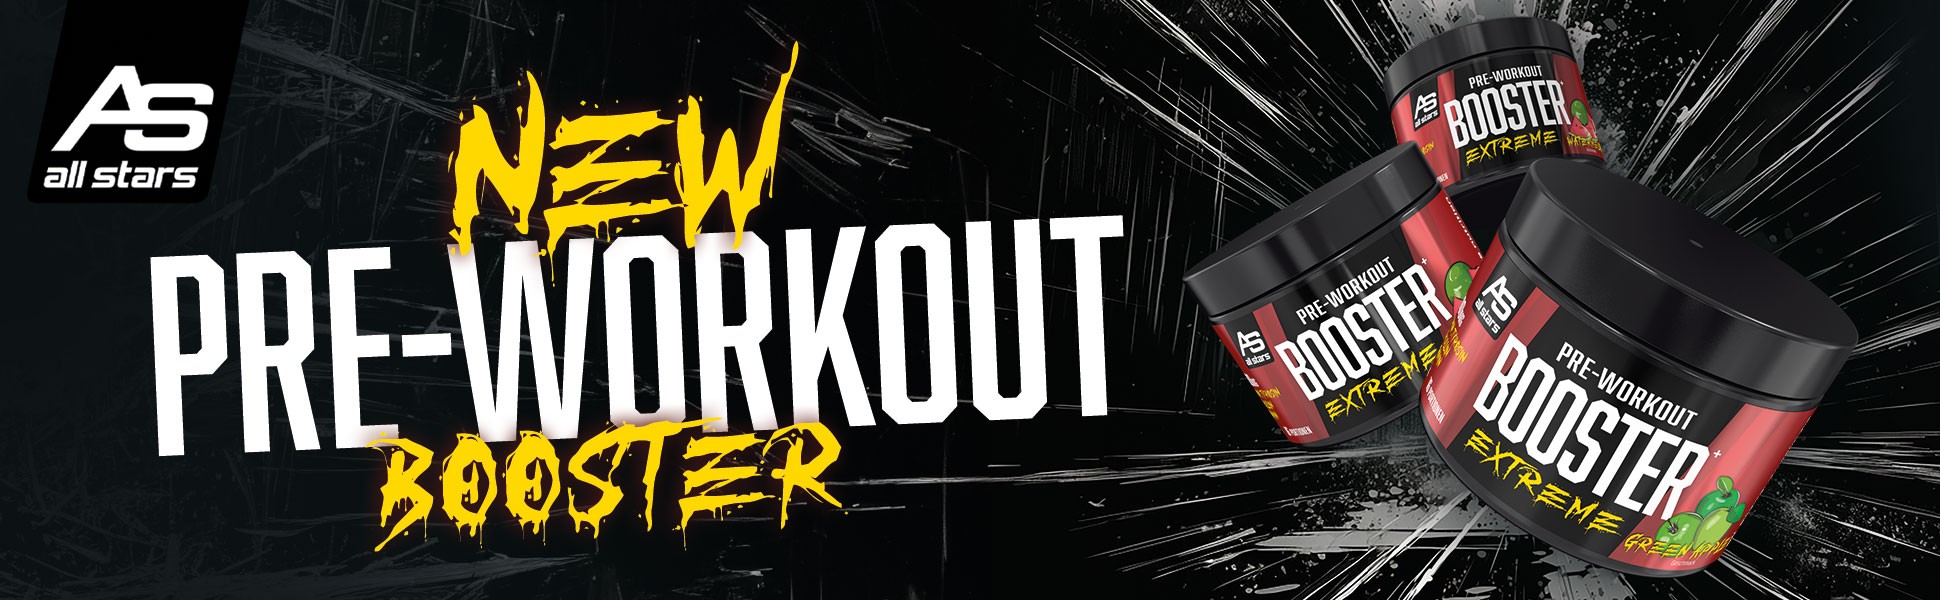 All stars Pre workout Booster